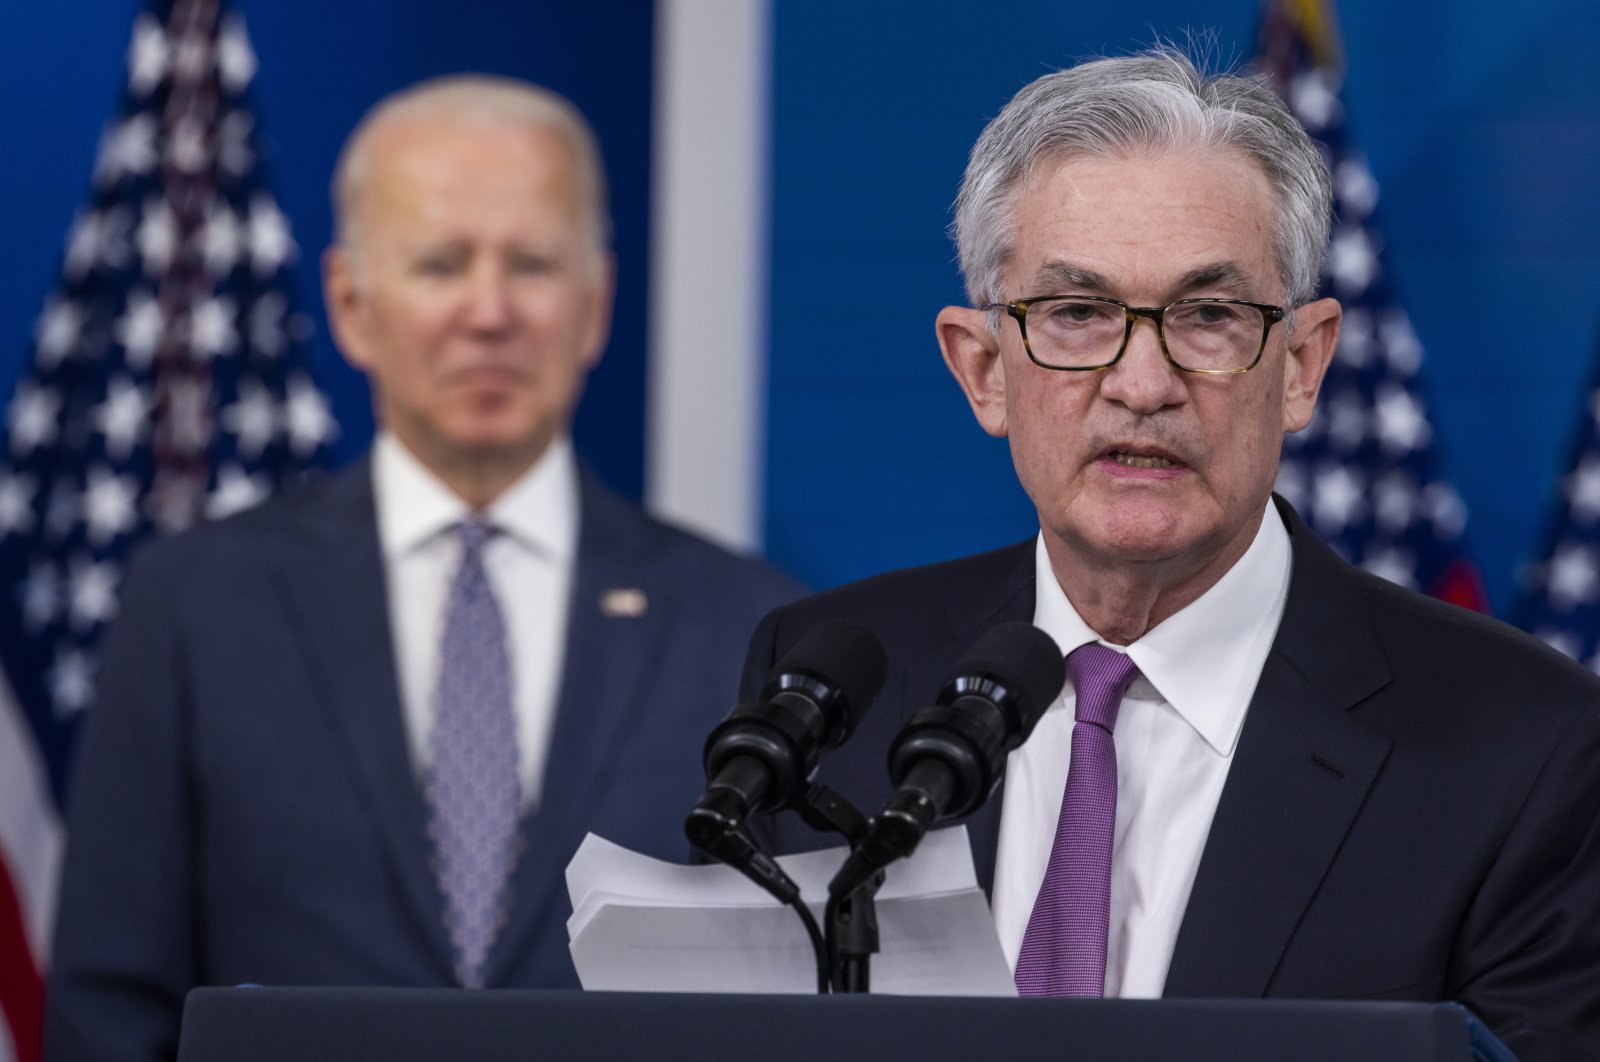 Jerome Powell (R) speaks after U.S. President Joe Biden (L) nominated him to a second term as U.S. Federal Reserve (Fed) Chair, in the Eisenhower Executive Office Building in Washington, D.C., U.S., Nov. 22, 2021. (EPA Photo)